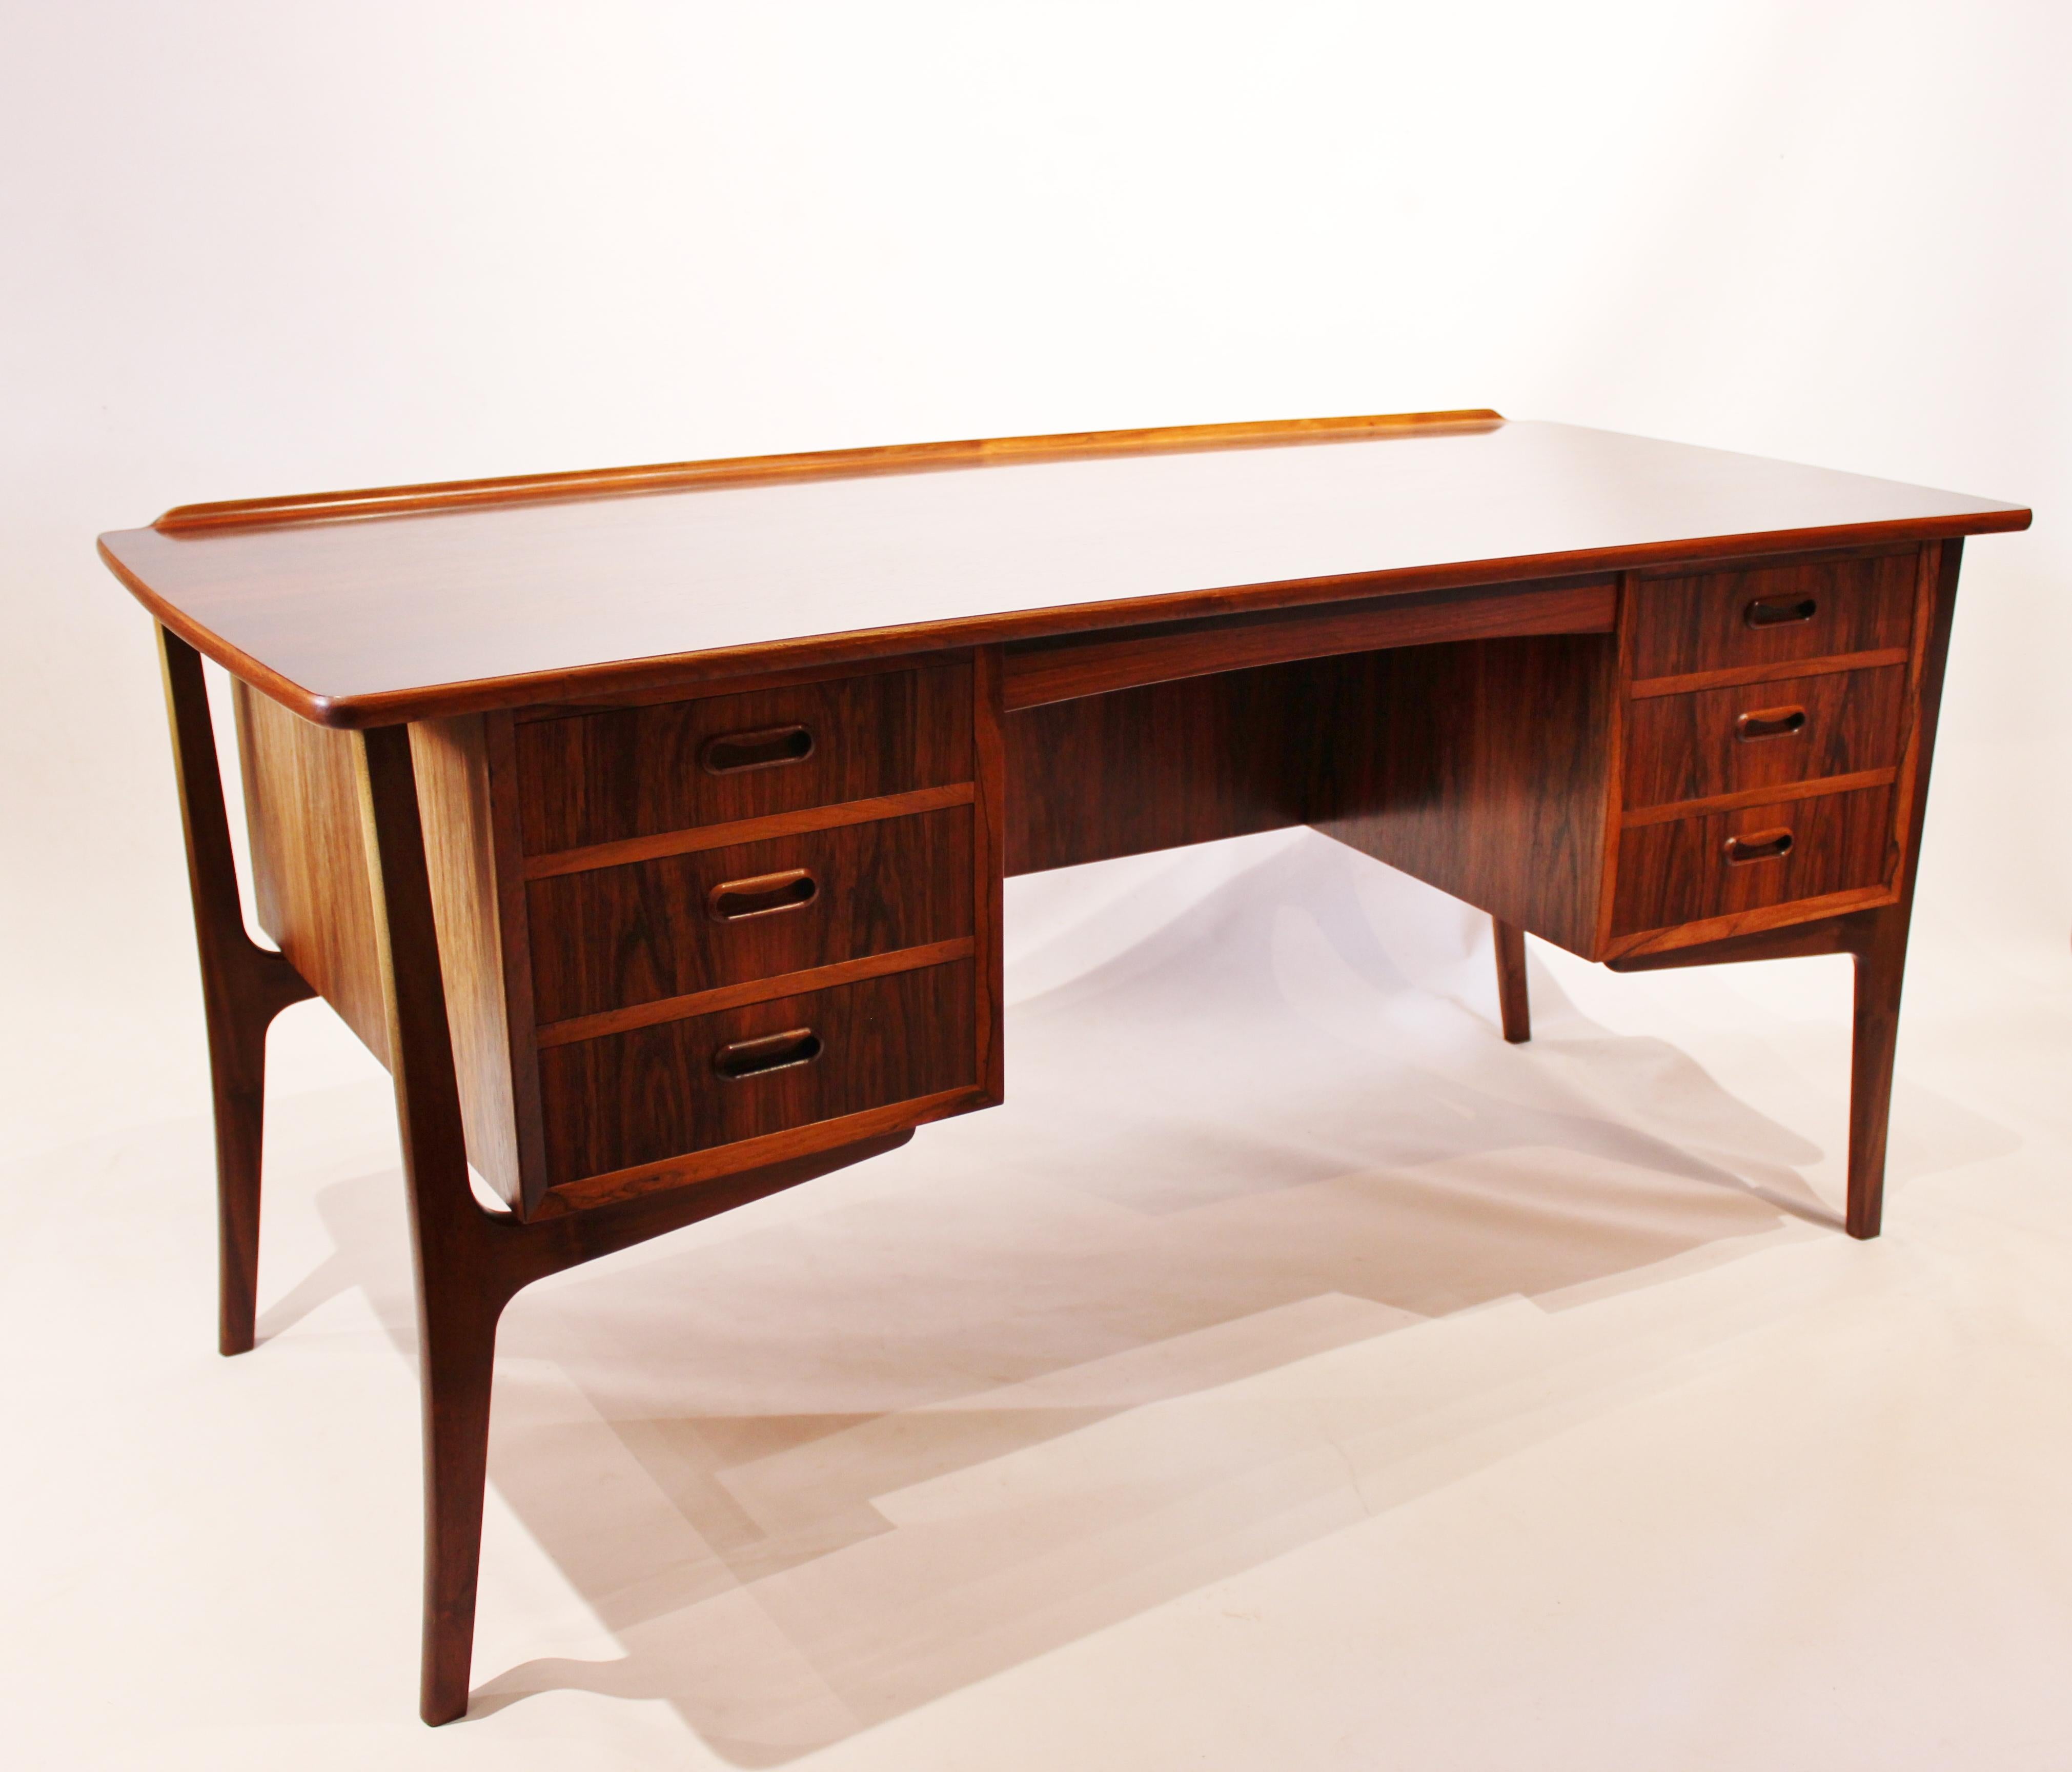 Desk in rosewood designed by Svend Aage Madsen and manufactured by H. P. Hansen furniture factory from the 1960s. The table is in great vintage condition.